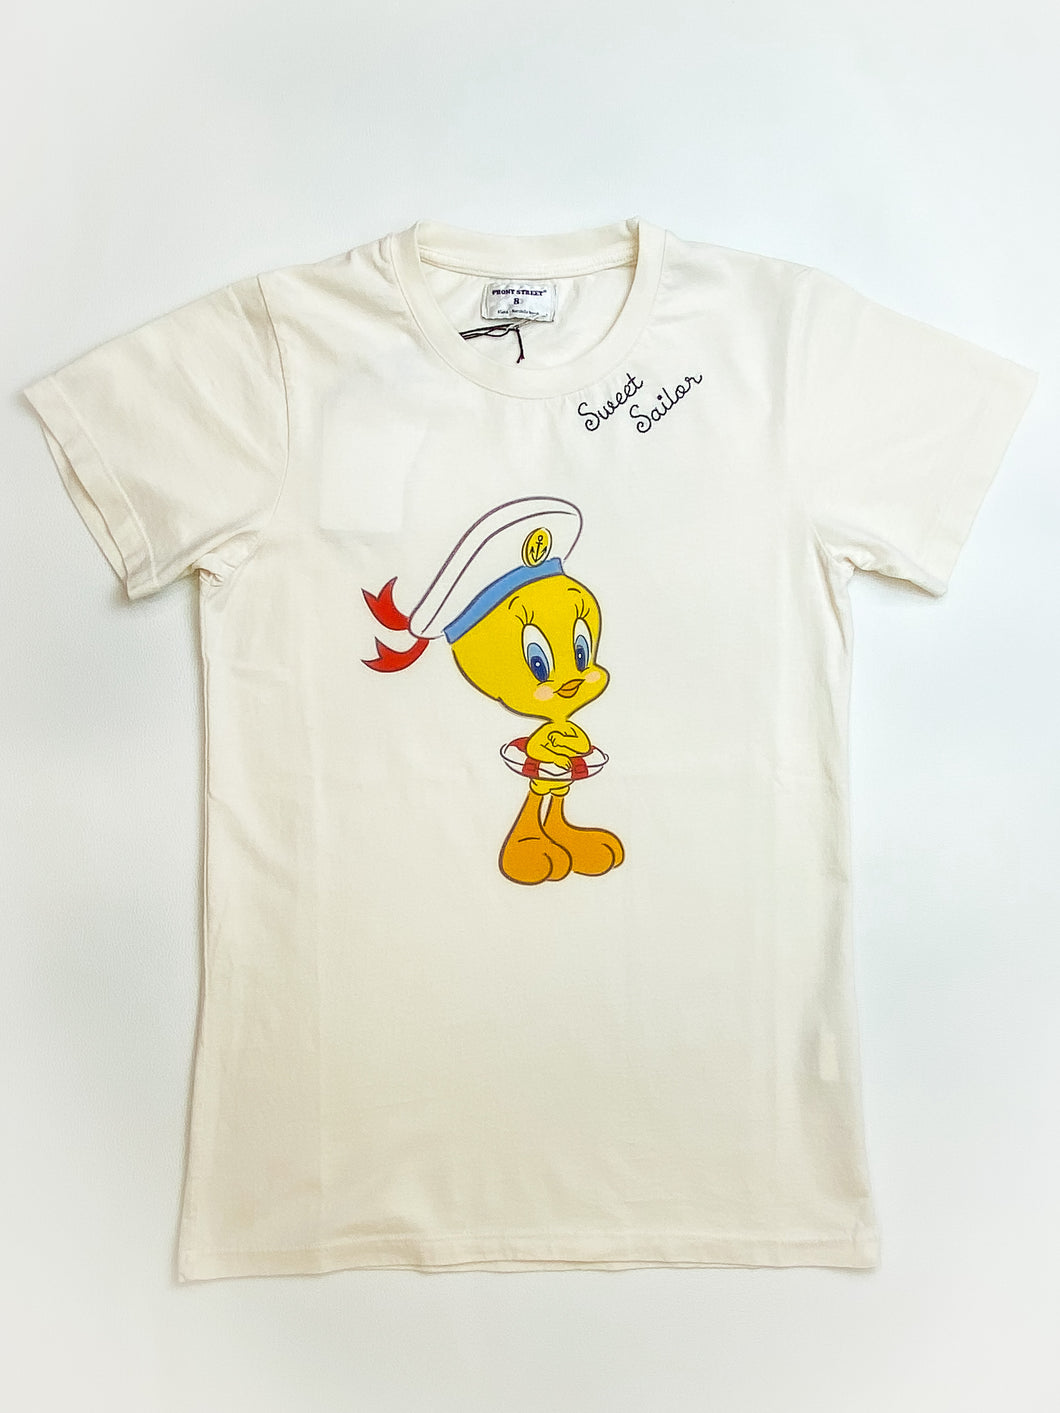 FRONT STREET 8 T-shirt Looney Tunes 